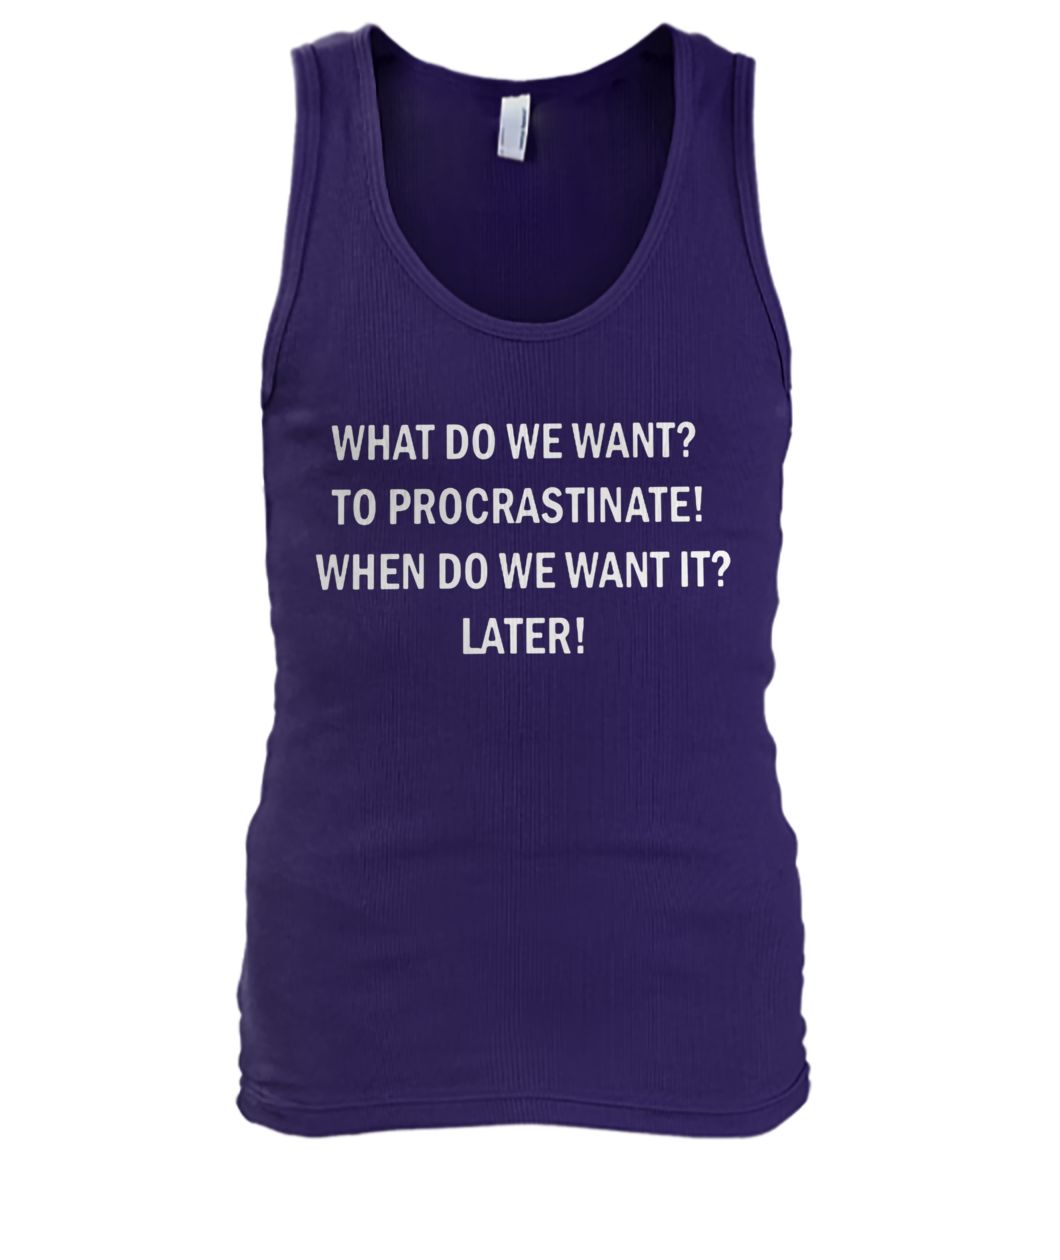 What do we want to procrastinate when do we want it later tank top